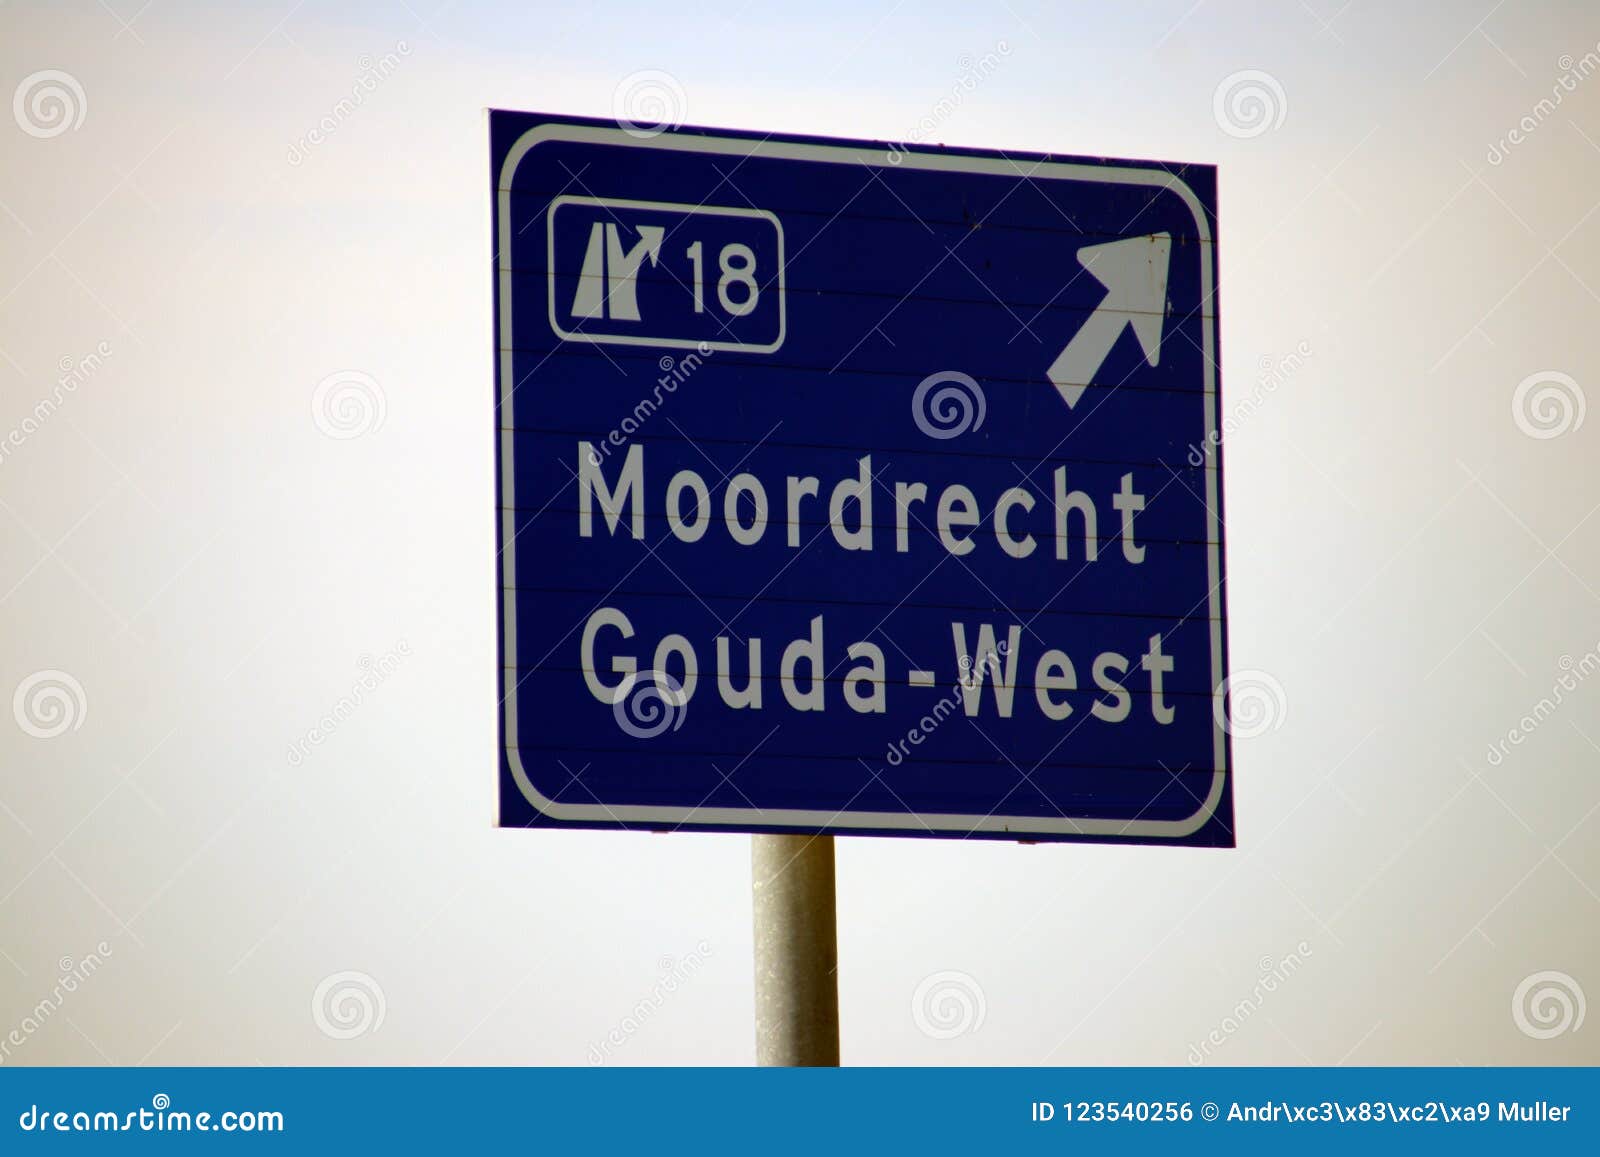 sign at the motorway for a junction in the netherlands to the towns gouda and moordrecht along a20